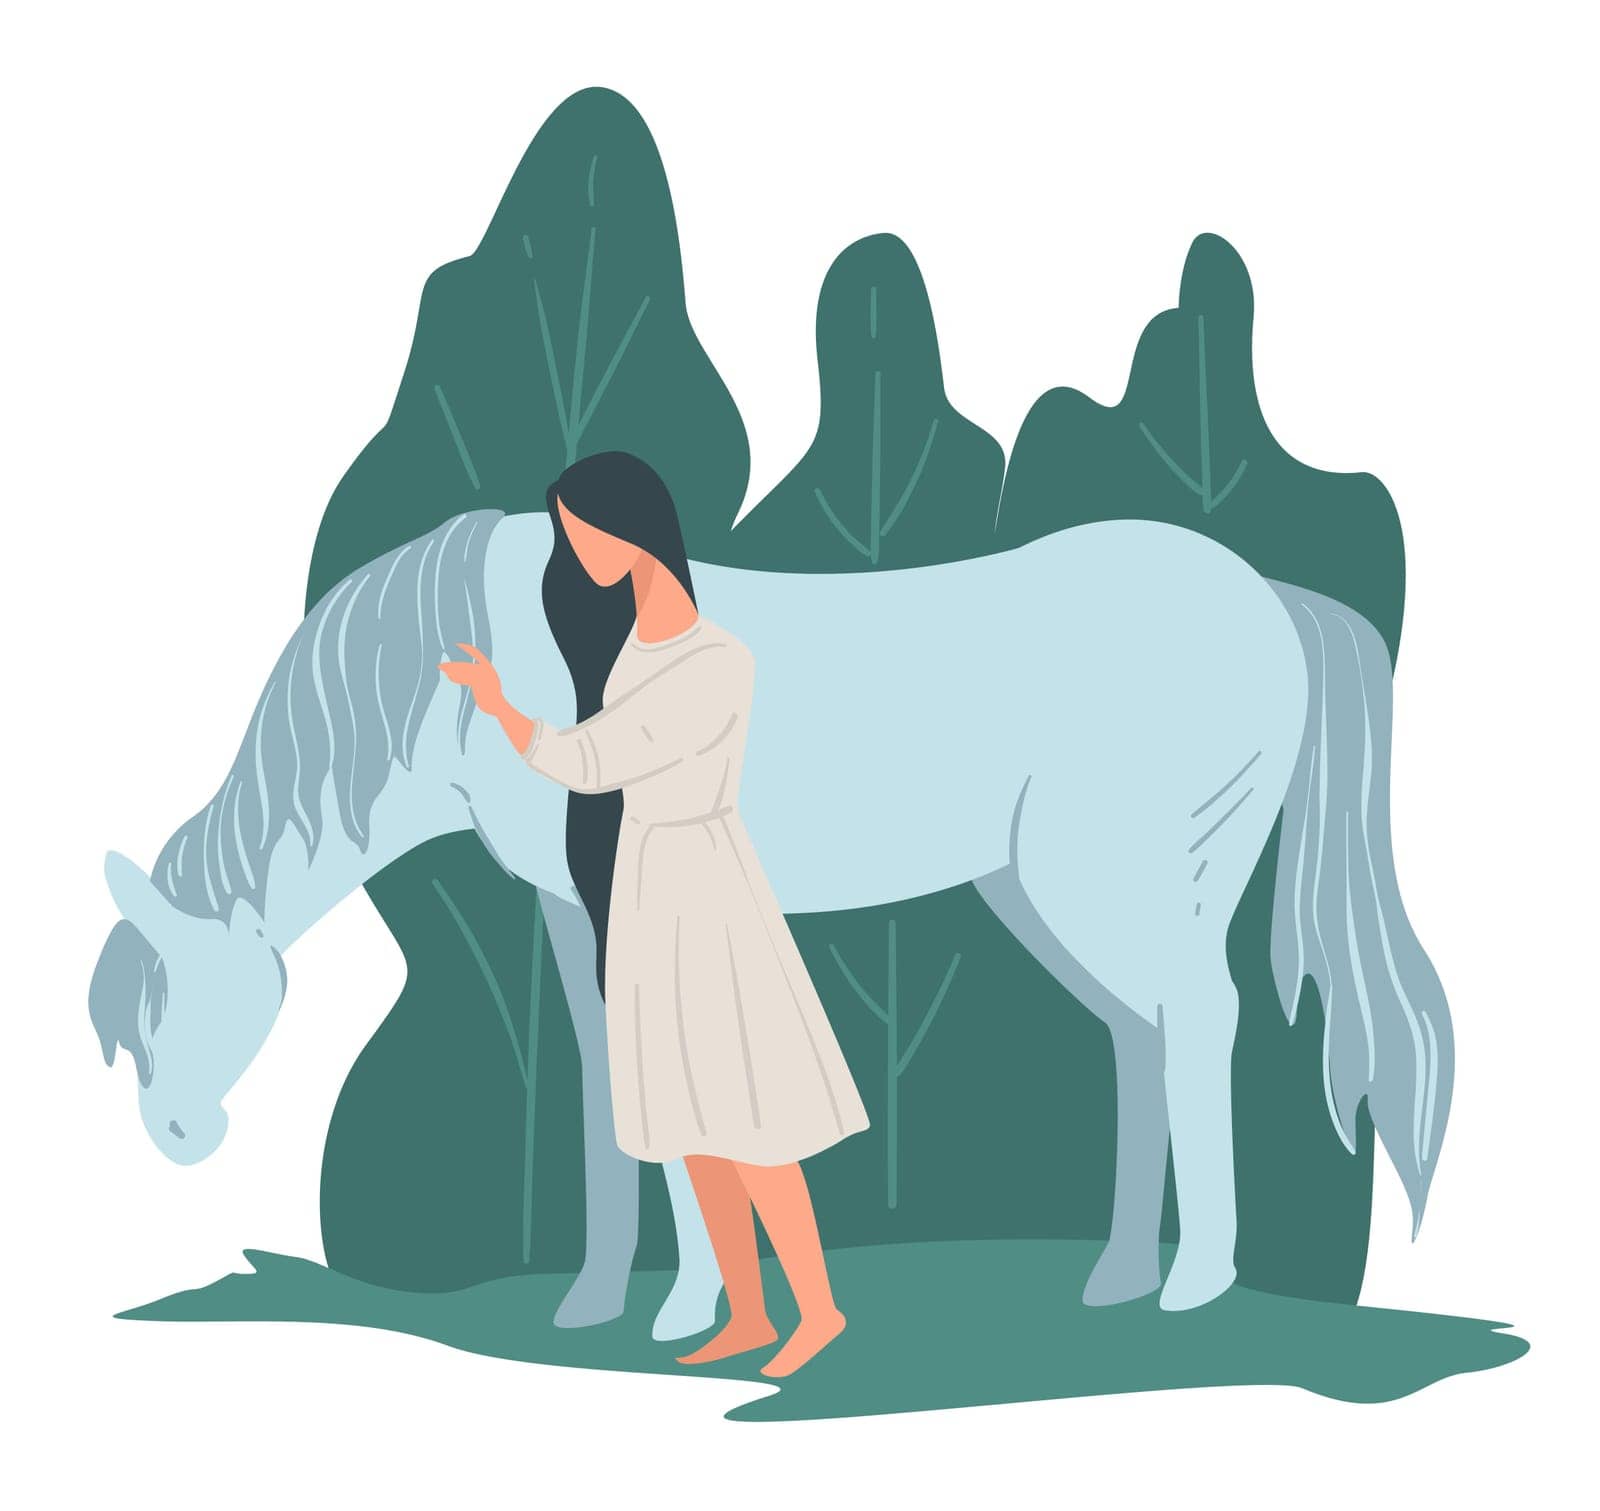 Woman standing by horse, riding or racing hobby. Landscape with female character hugging mare or stallion. Personage surrounded by natural calm, forest with trees and foliage, vector in flat style